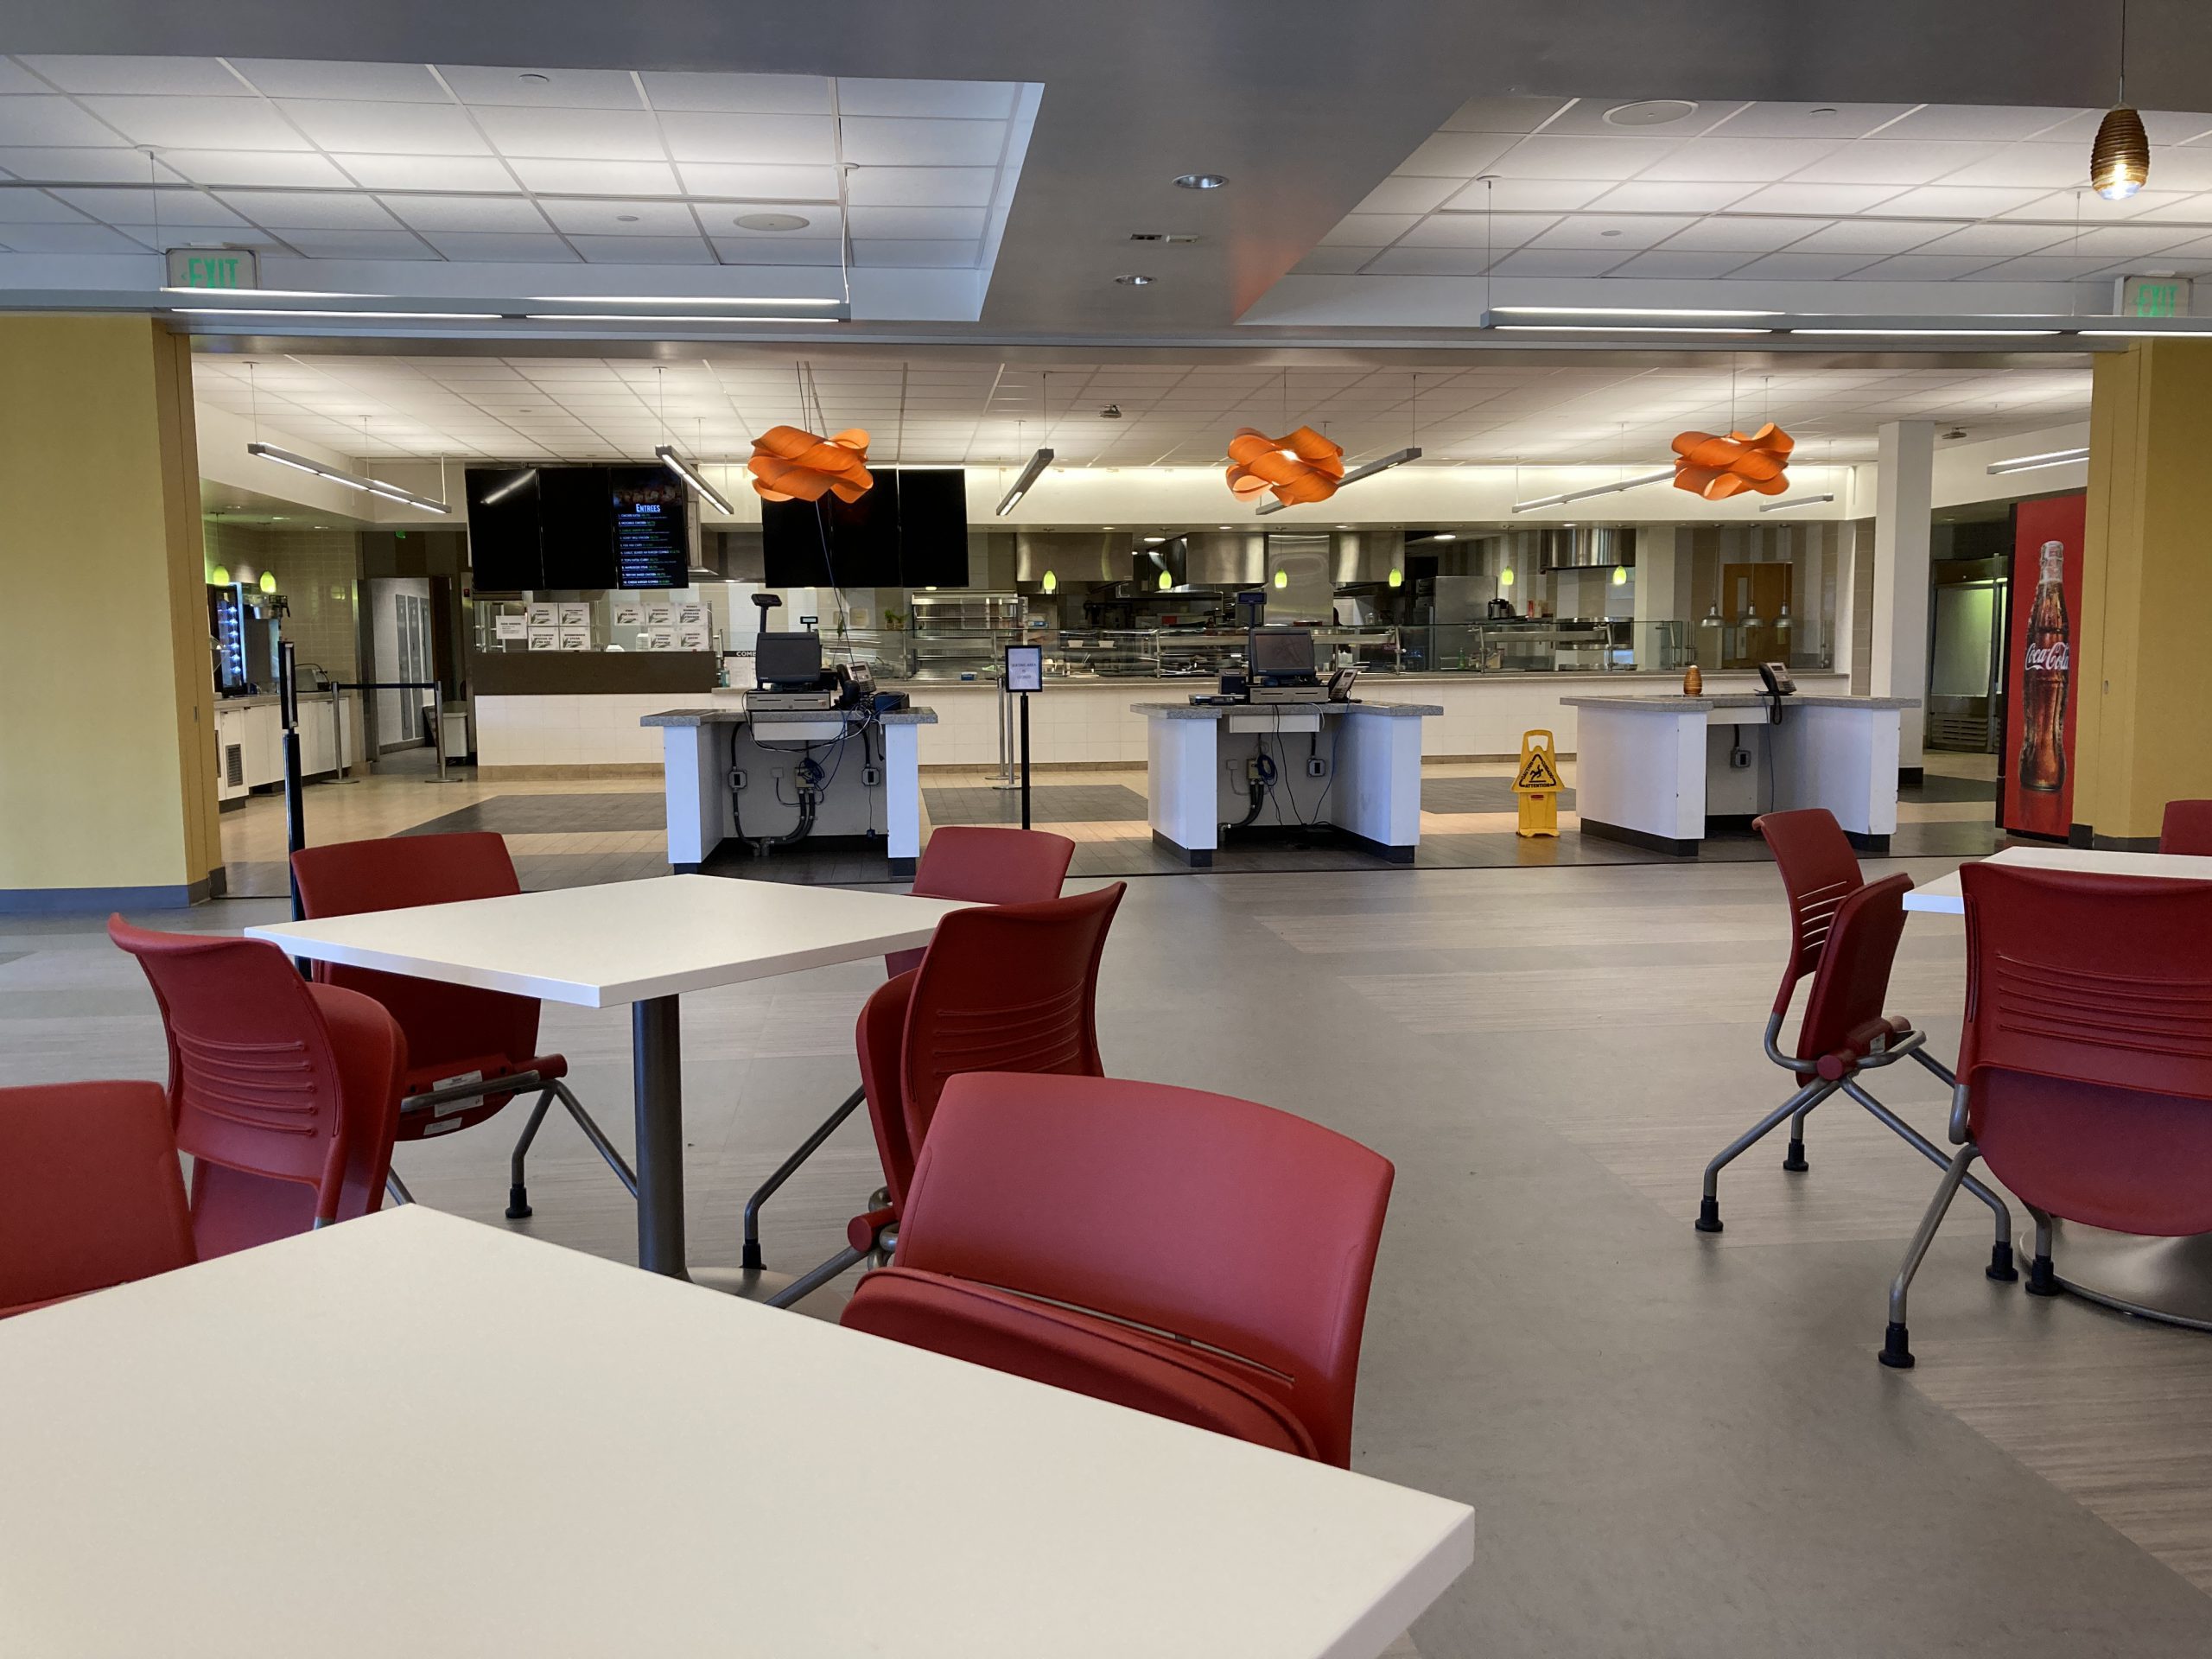 Part of the seating area and the kitchen area of the Dining Hall.